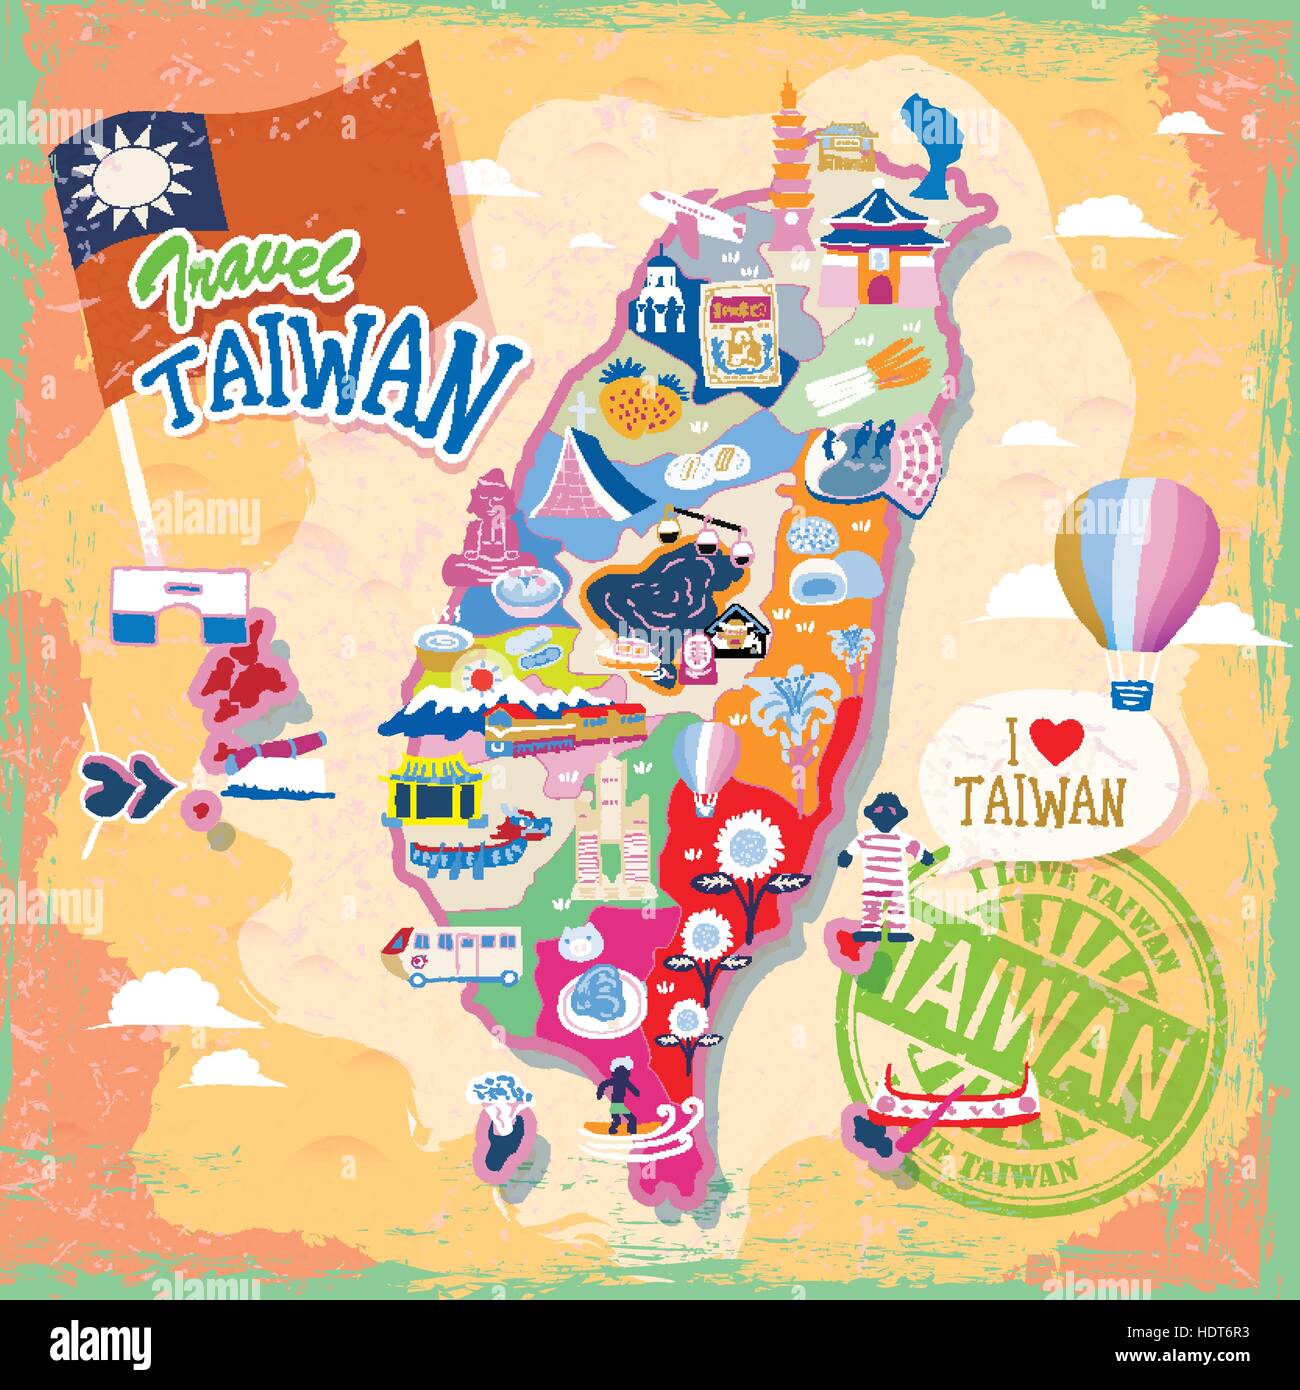 Taiwan travel map with attractions and specialties Stock Vector